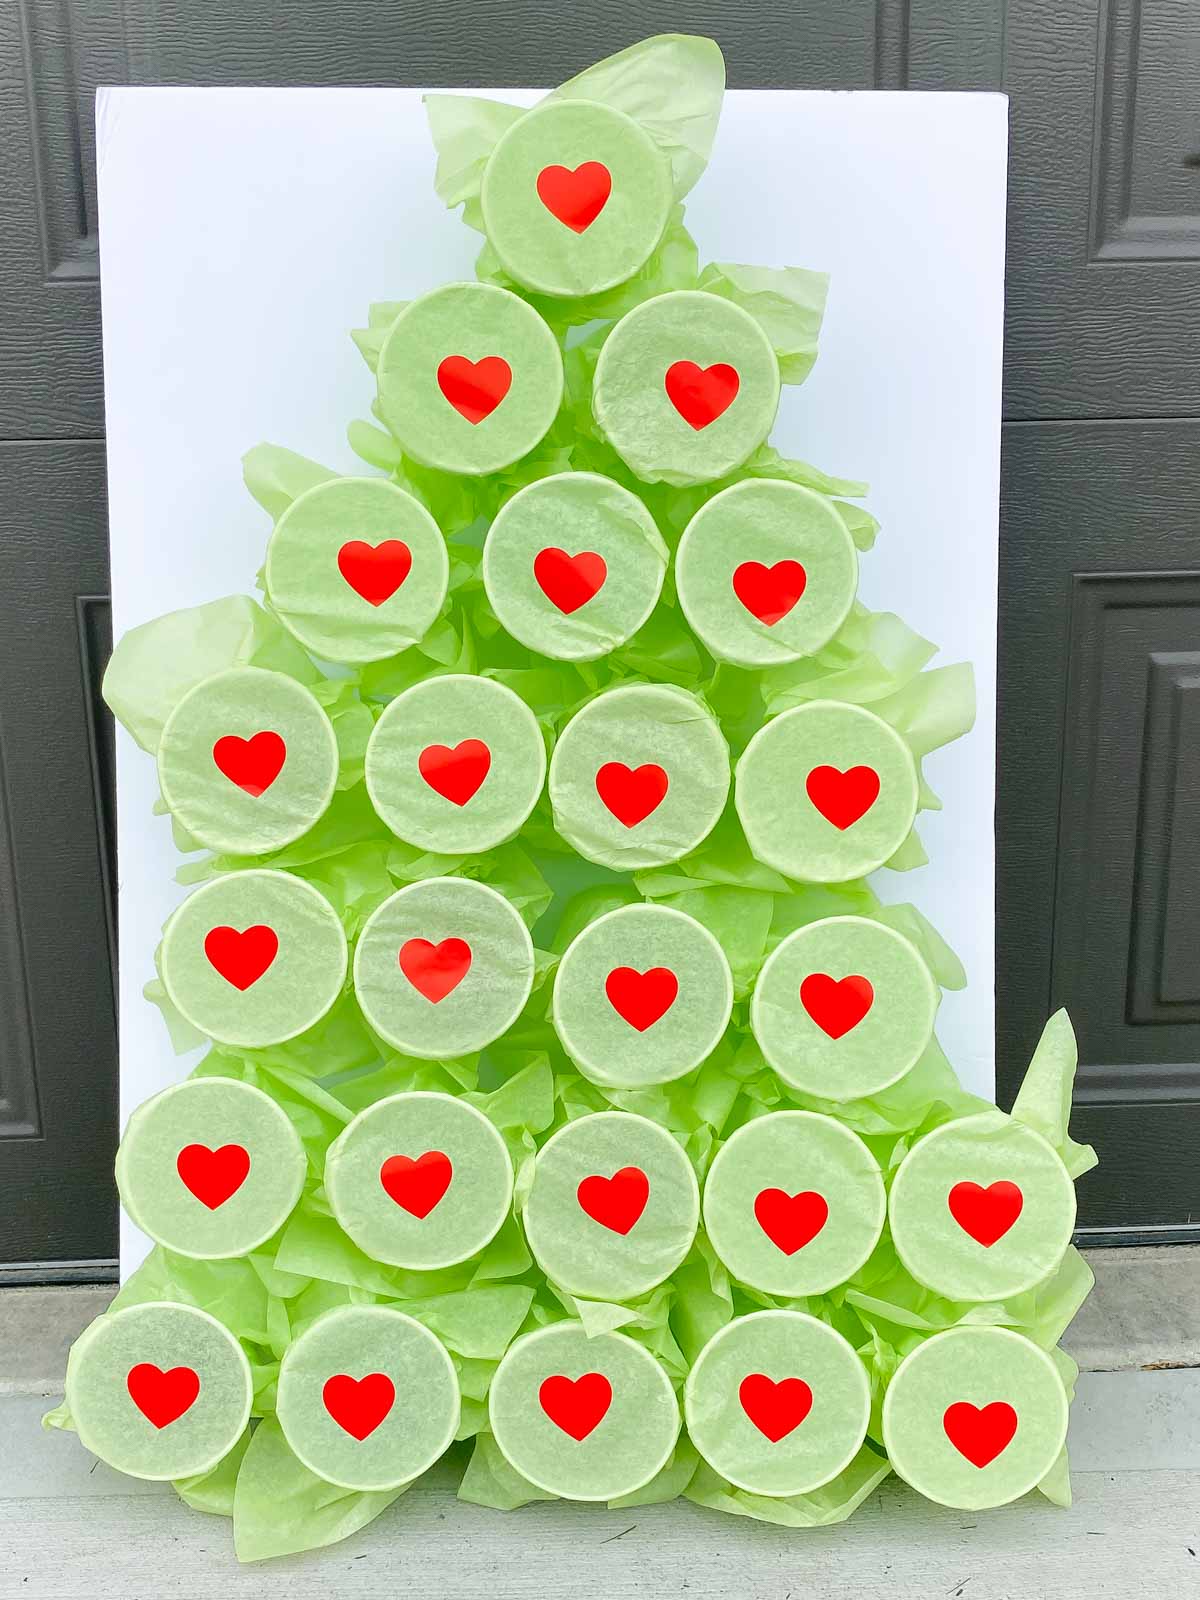 Holiday Time Play Foam Tree,Green,6 Pieces,Novelty Toy,Christmas